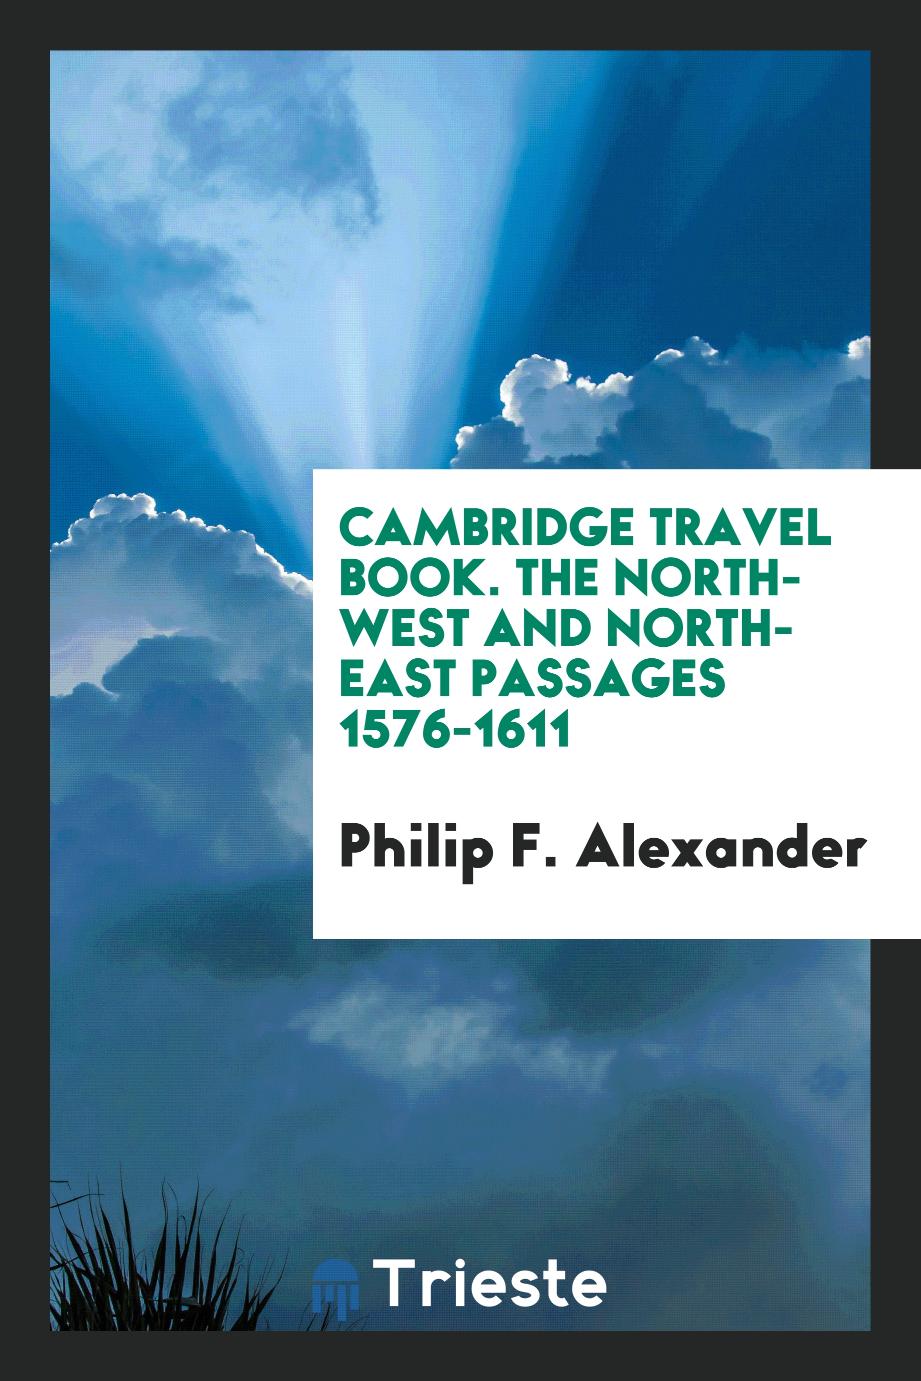 Cambridge travel book. The North-west and North-east passages 1576-1611